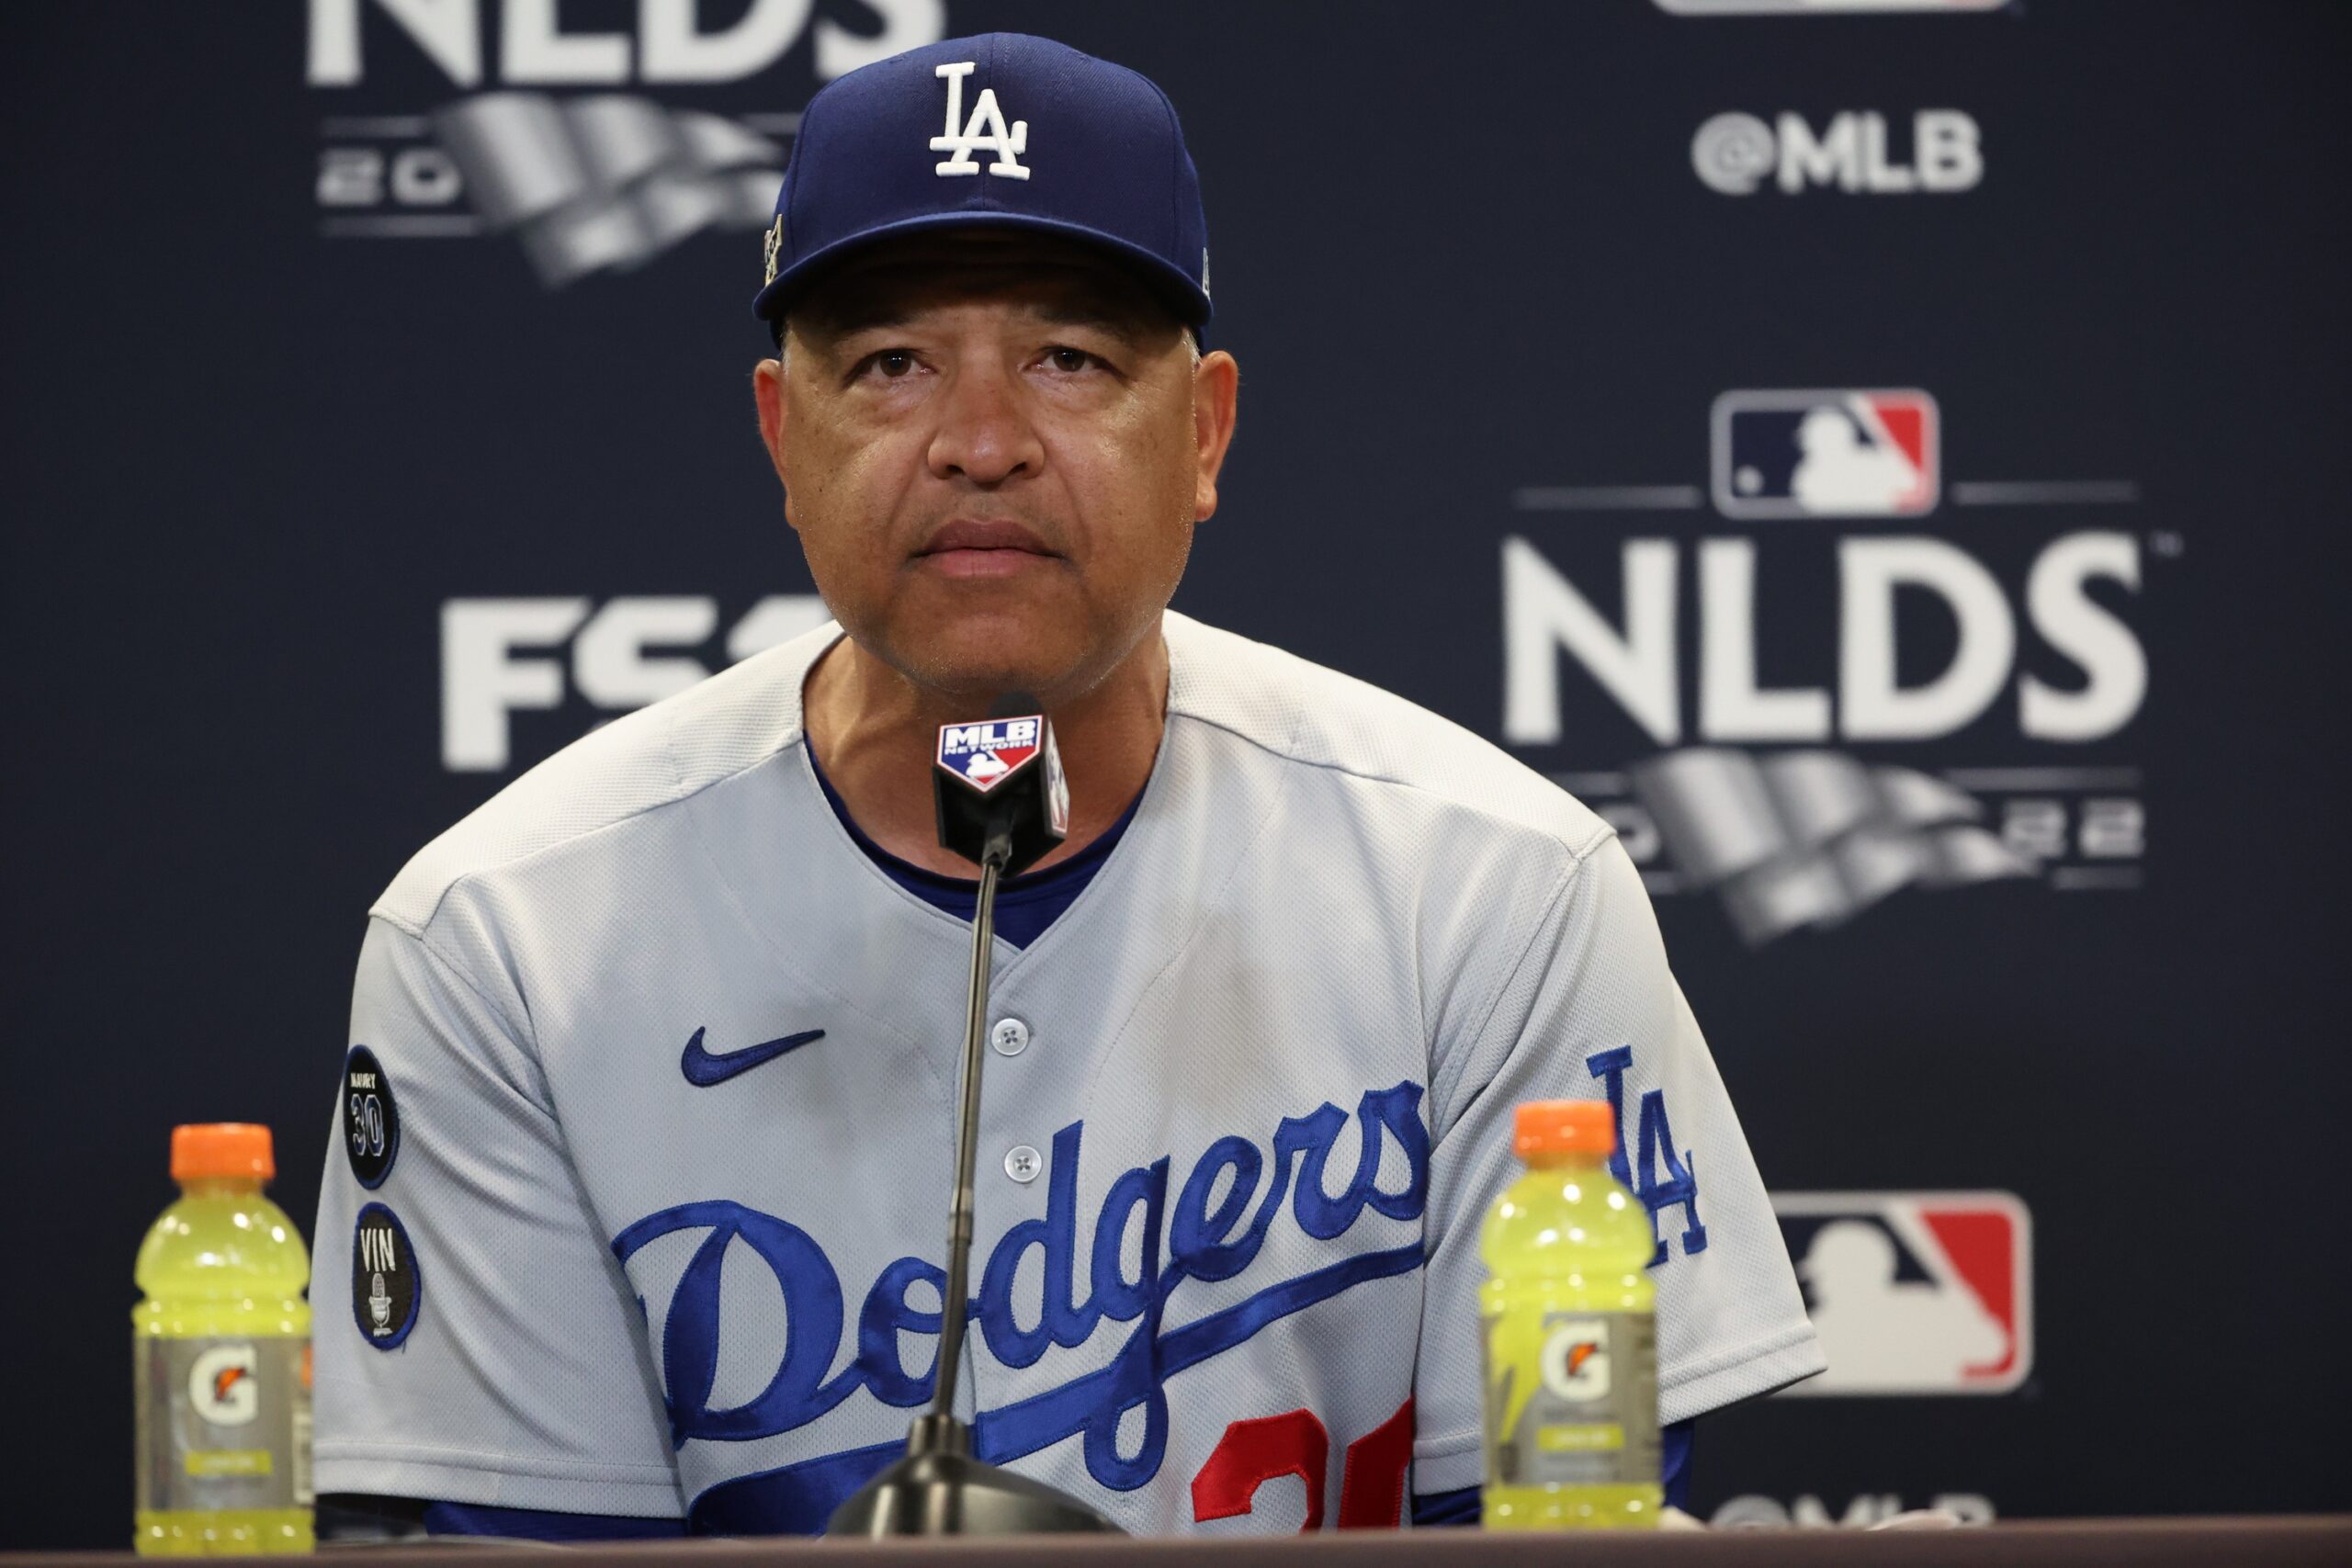 MLB Lockout Is Keeping Dave Roberts from Managing, but He Gets to